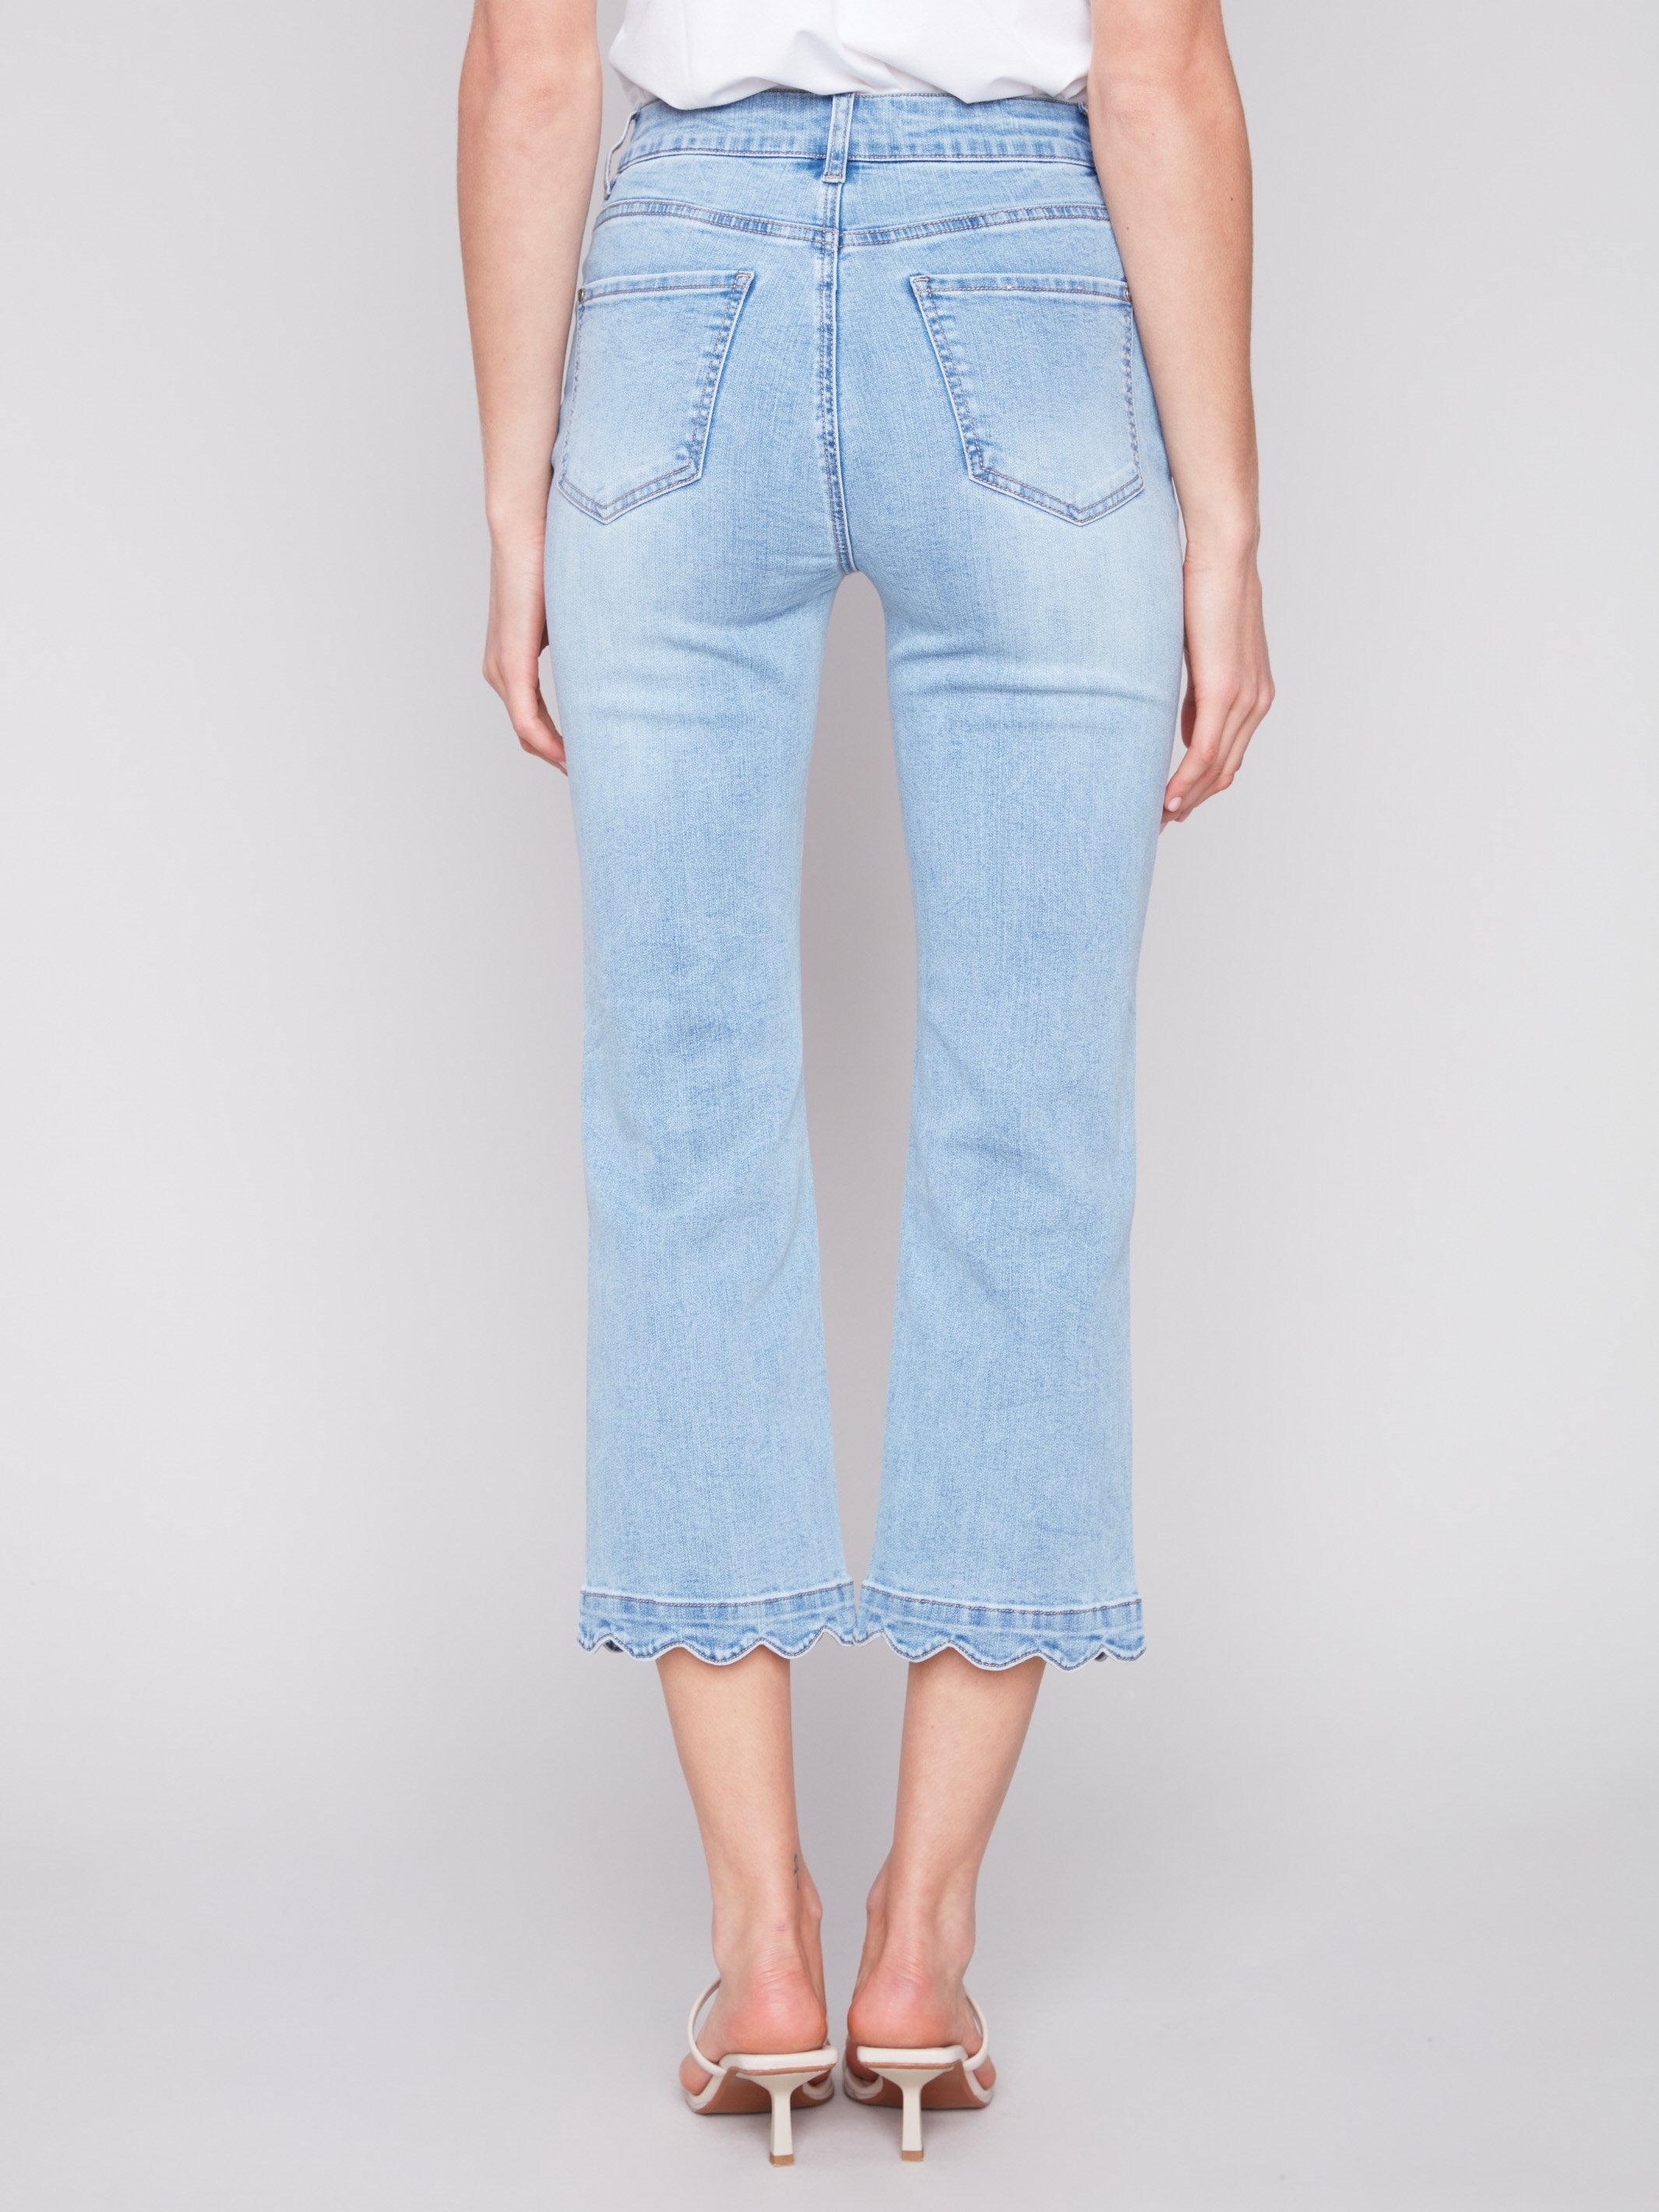 Straight Leg Jeans with Scallop Hem - Light Blue - Charlie B Collection Canada - Image 3